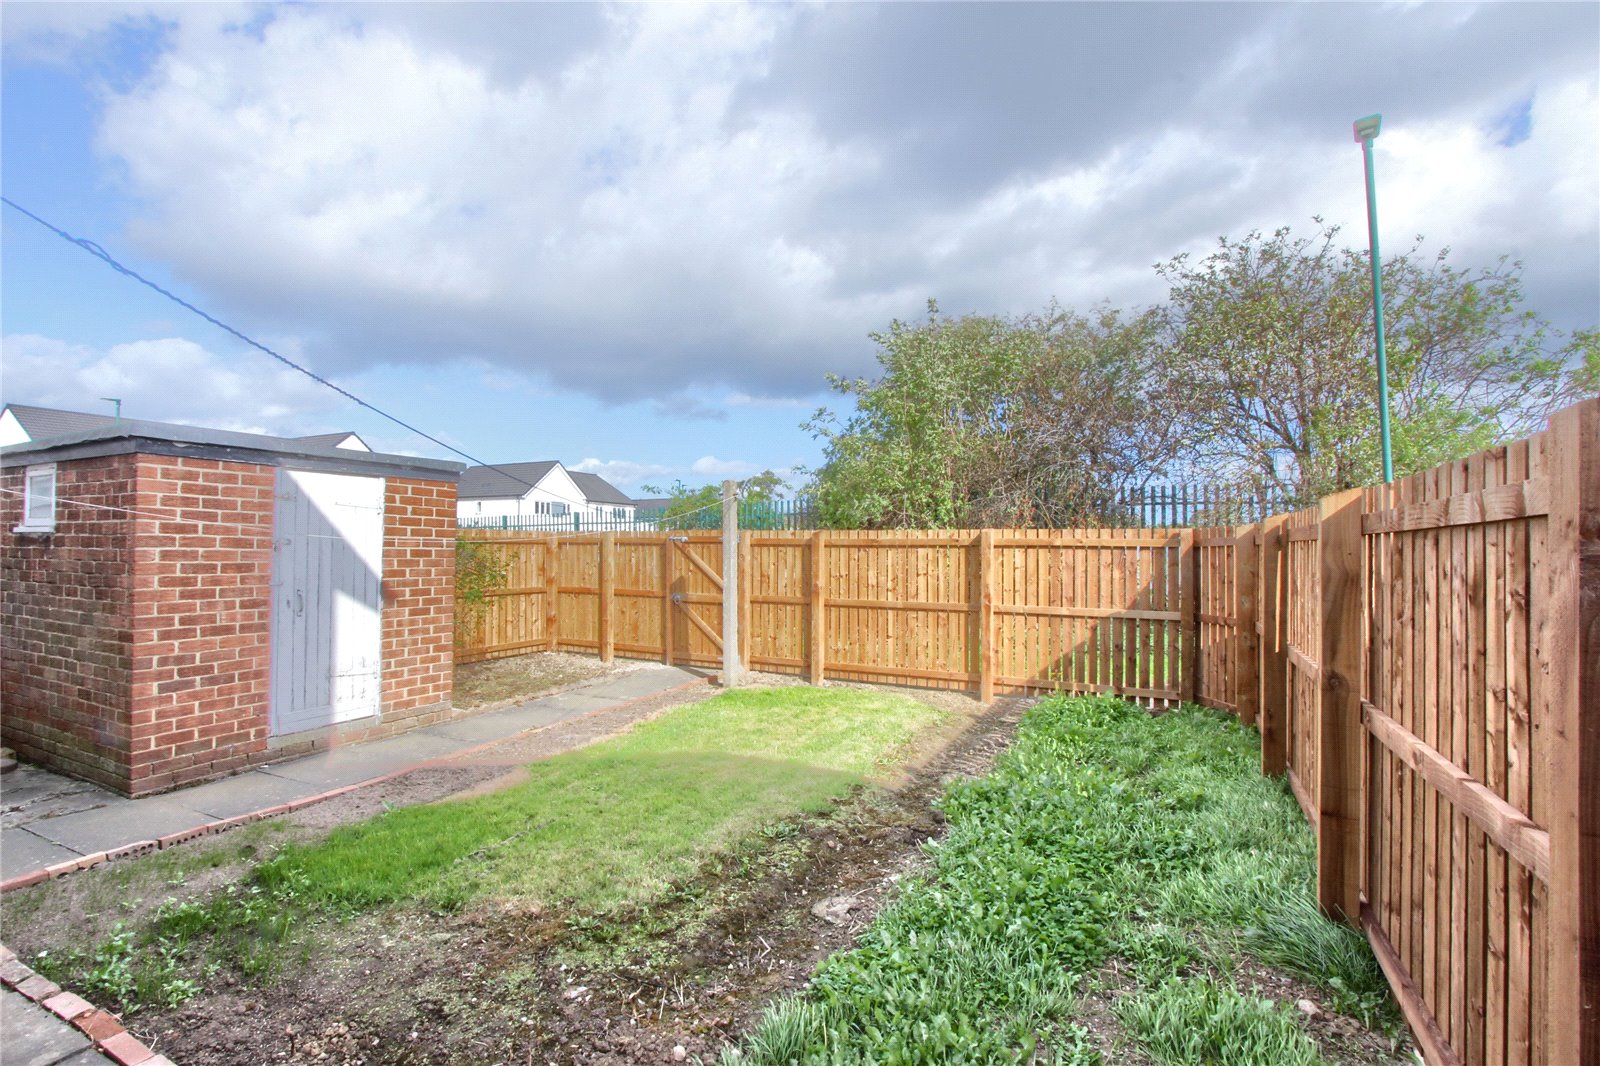 3 bed house for sale in Aberdare Road, Grangetown  - Property Image 7